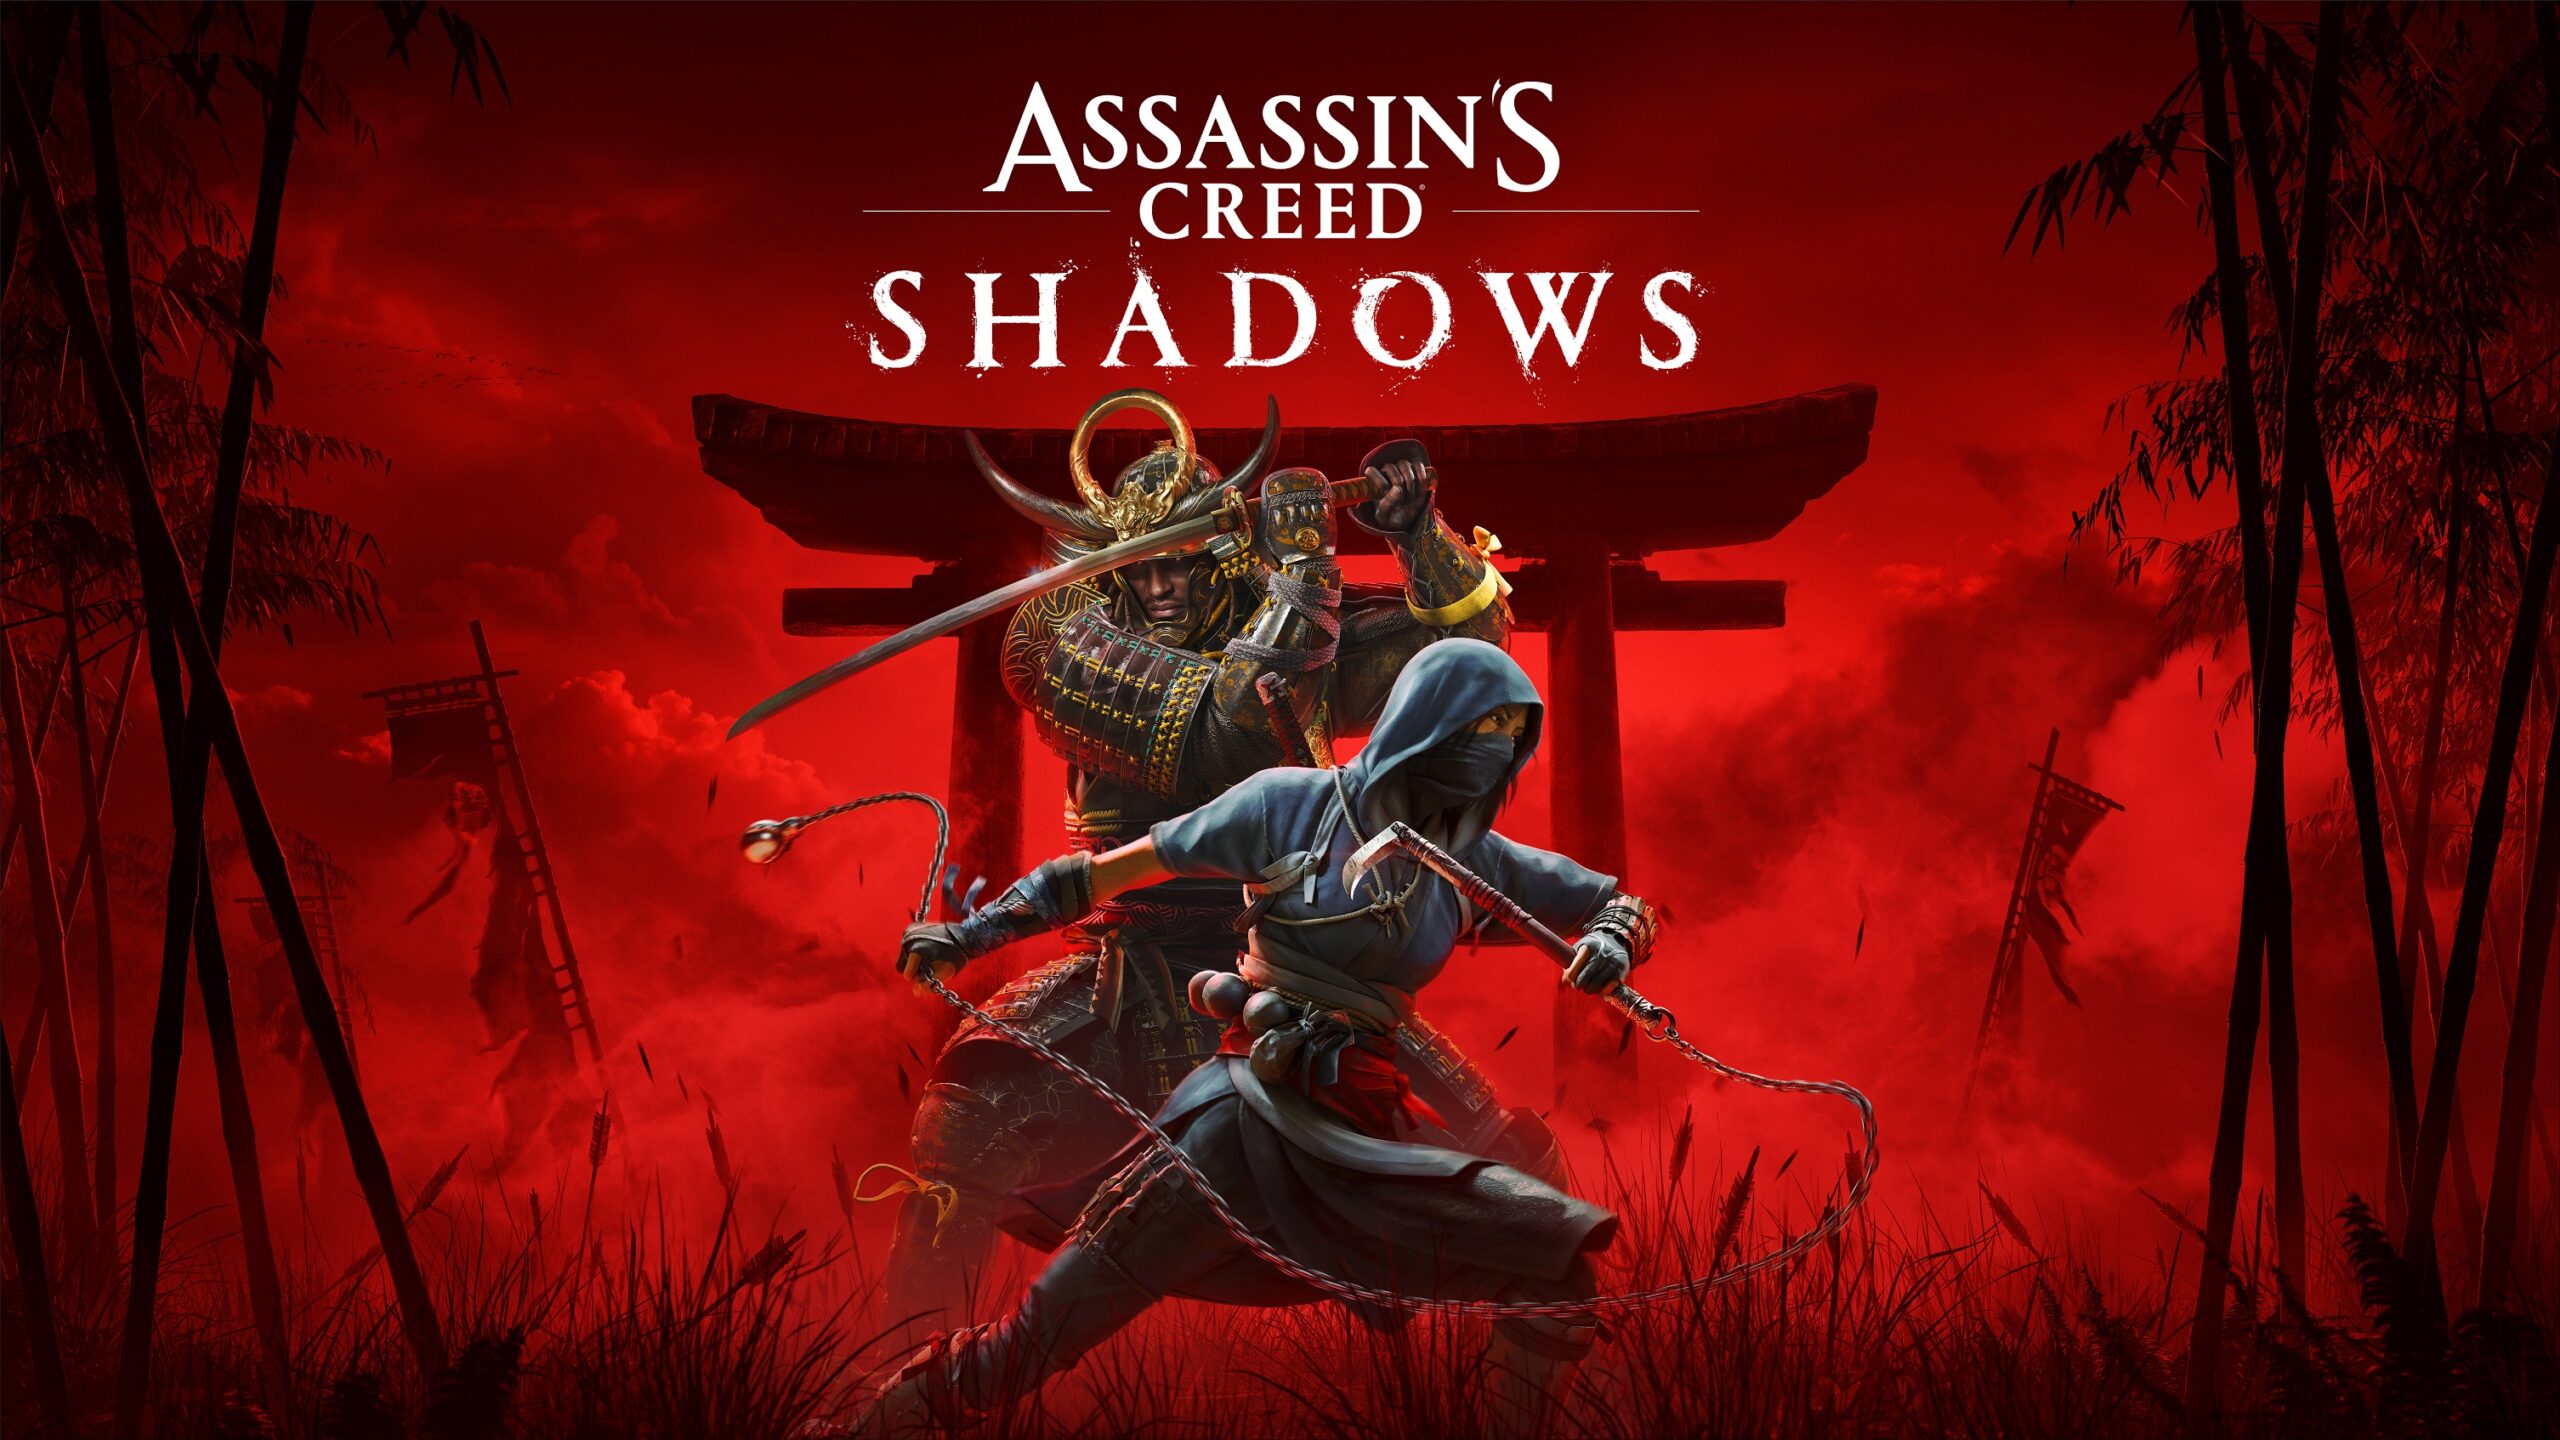 Play a samurai and a ninja in Asssassin’s Creed Shadows, out this November